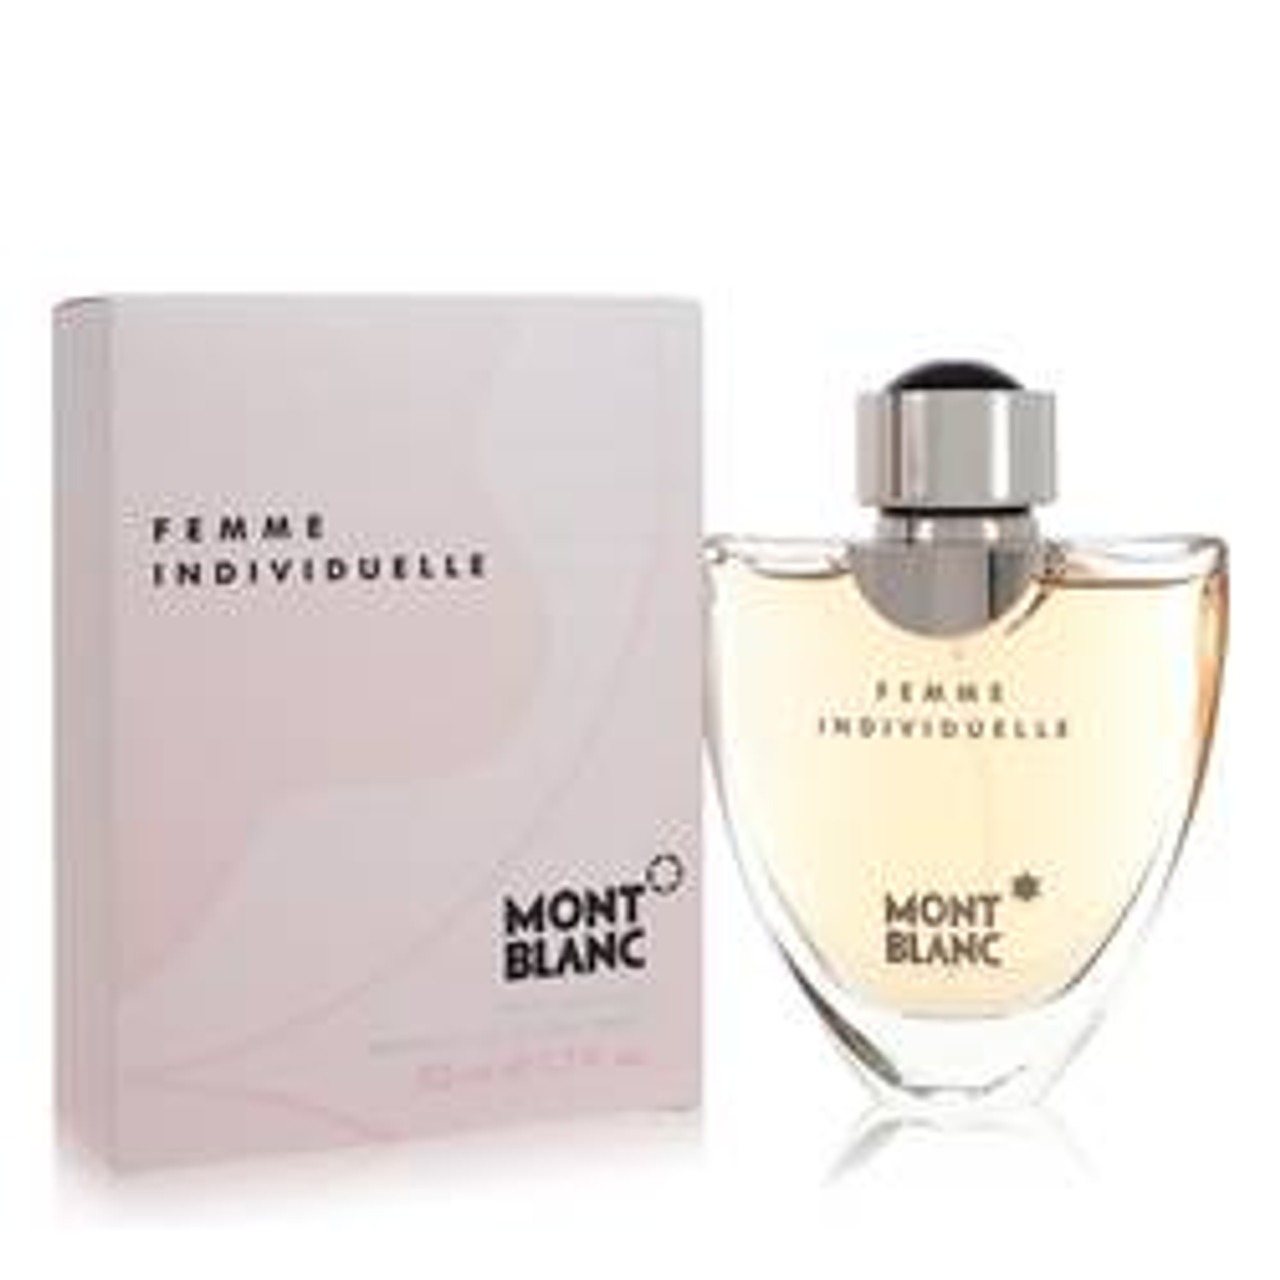 Individuelle Perfume By Mont Blanc Eau De Toilette Spray 1.7 oz for Women - [From 79.50 - Choose pk Qty ] - *Ships from Miami